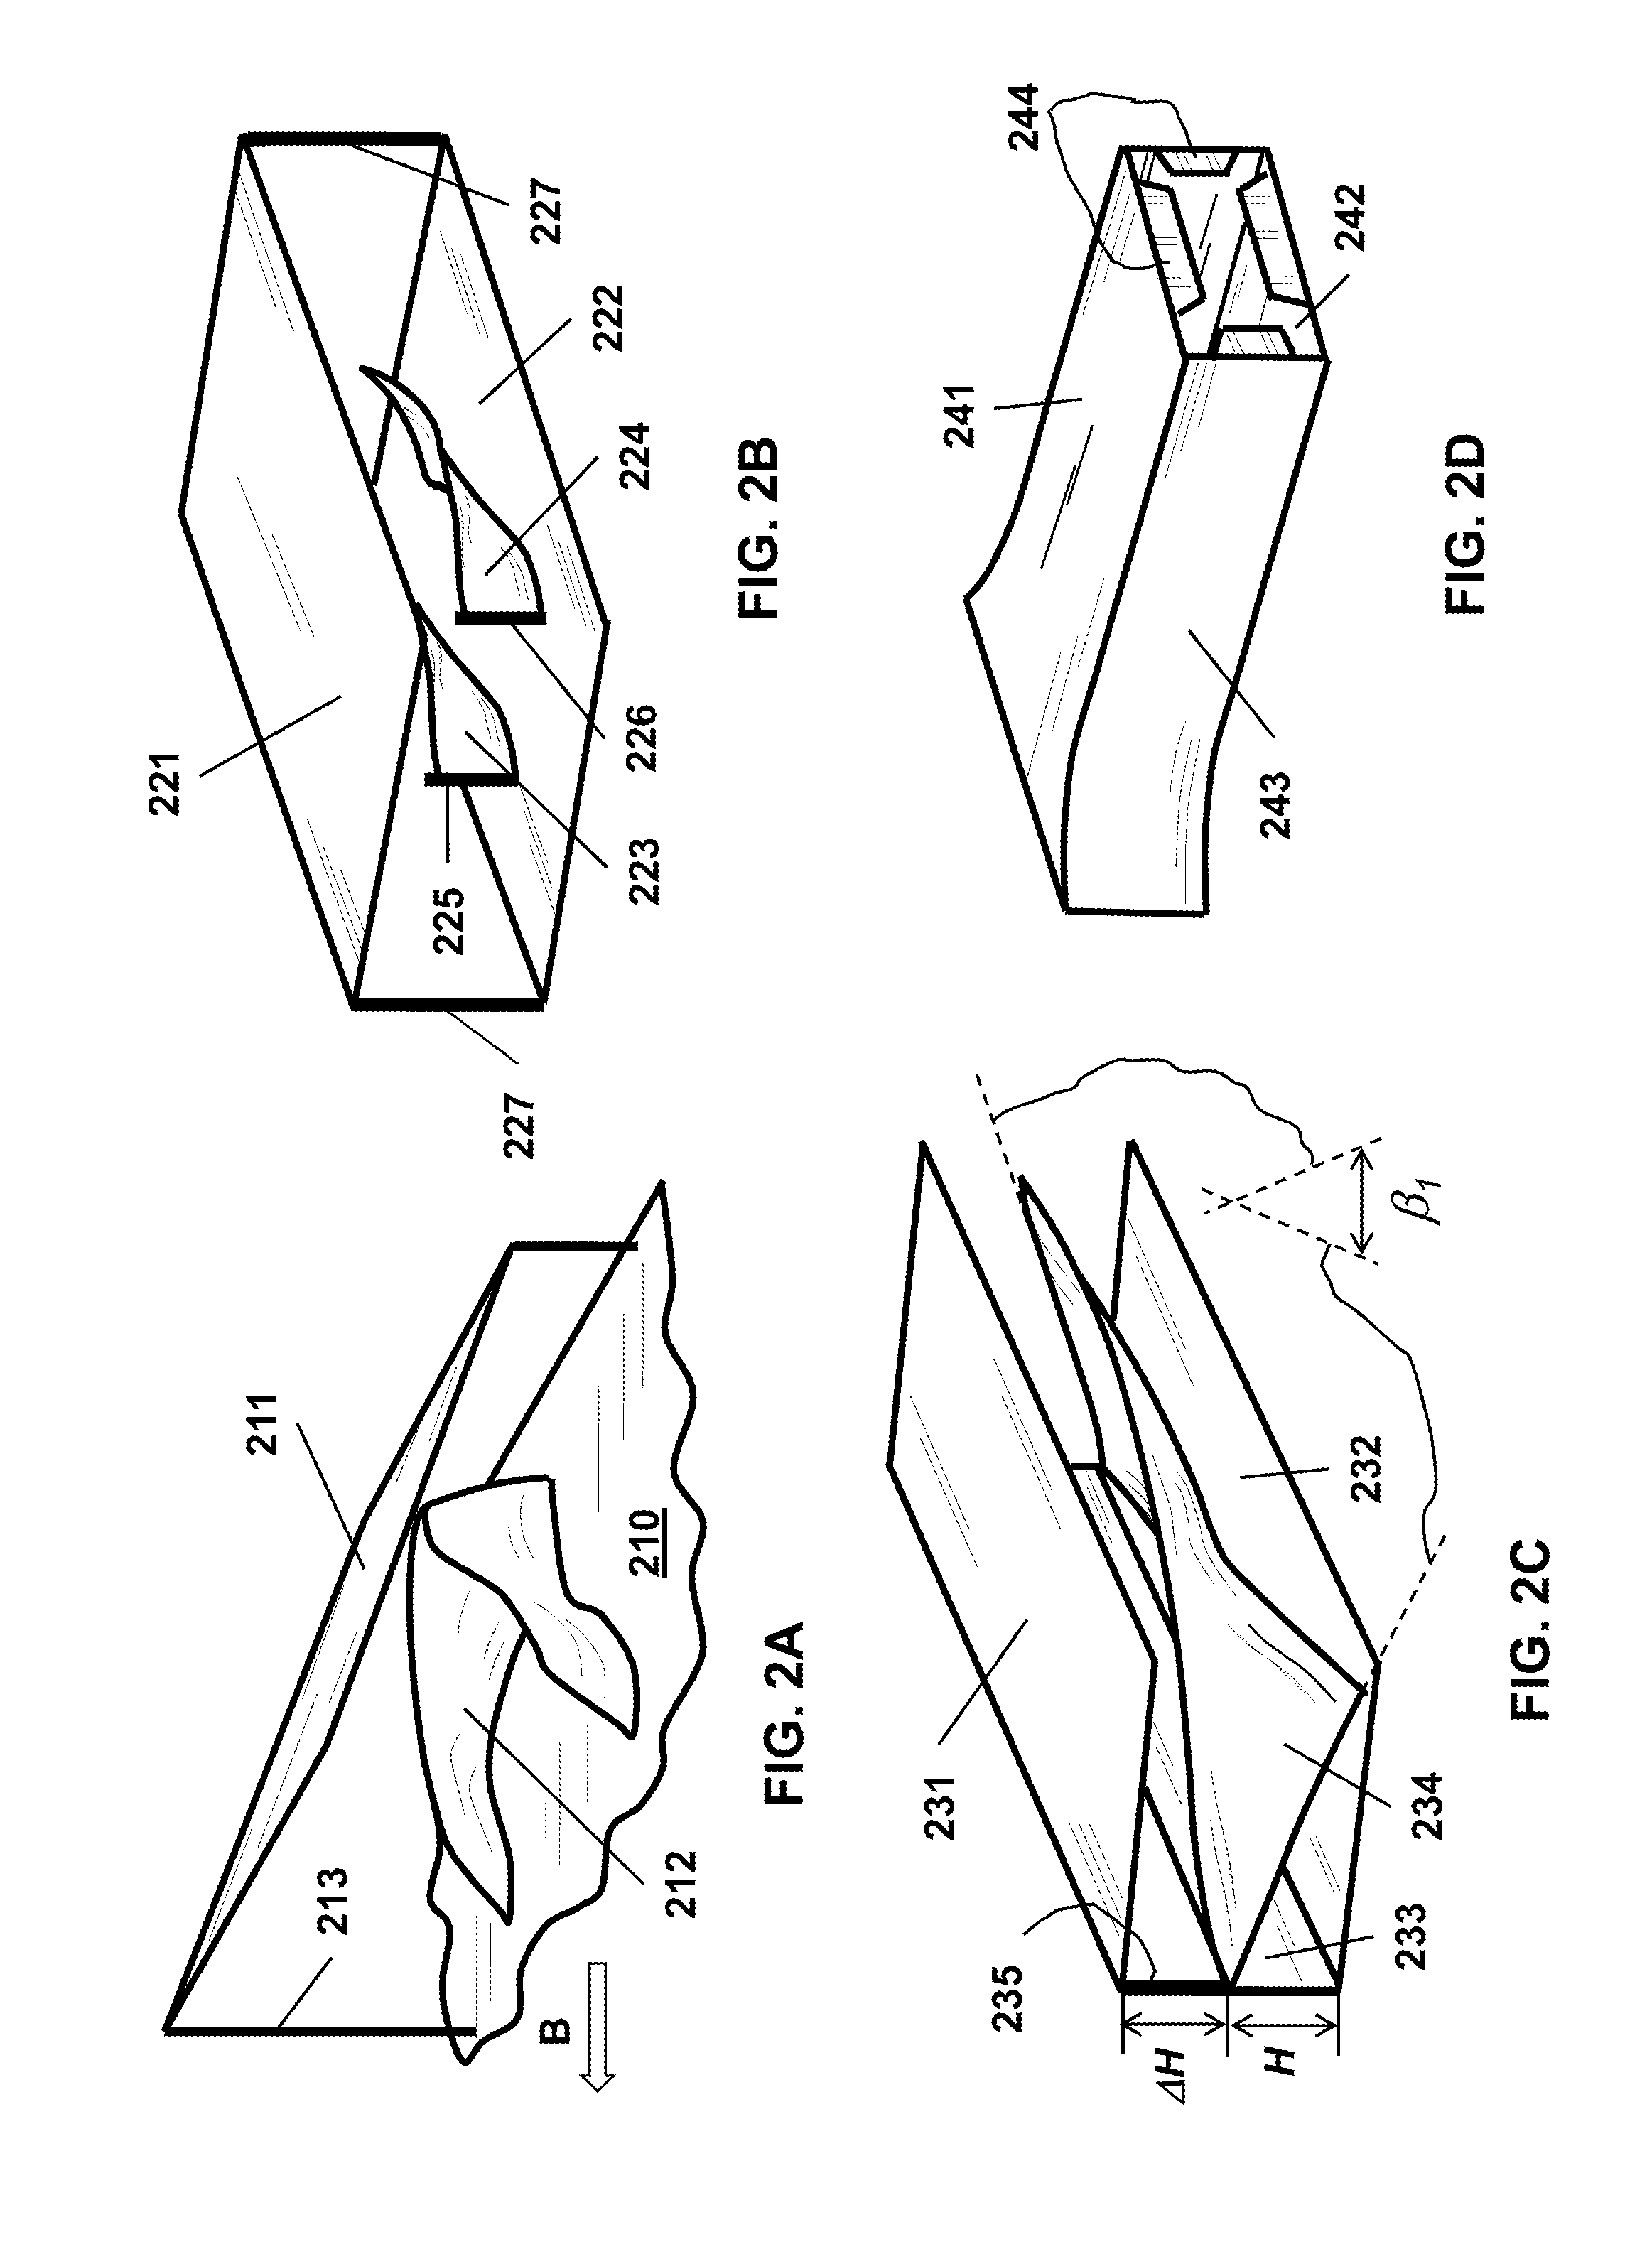 Device, assembly, and system for reducing aerodynamic drag